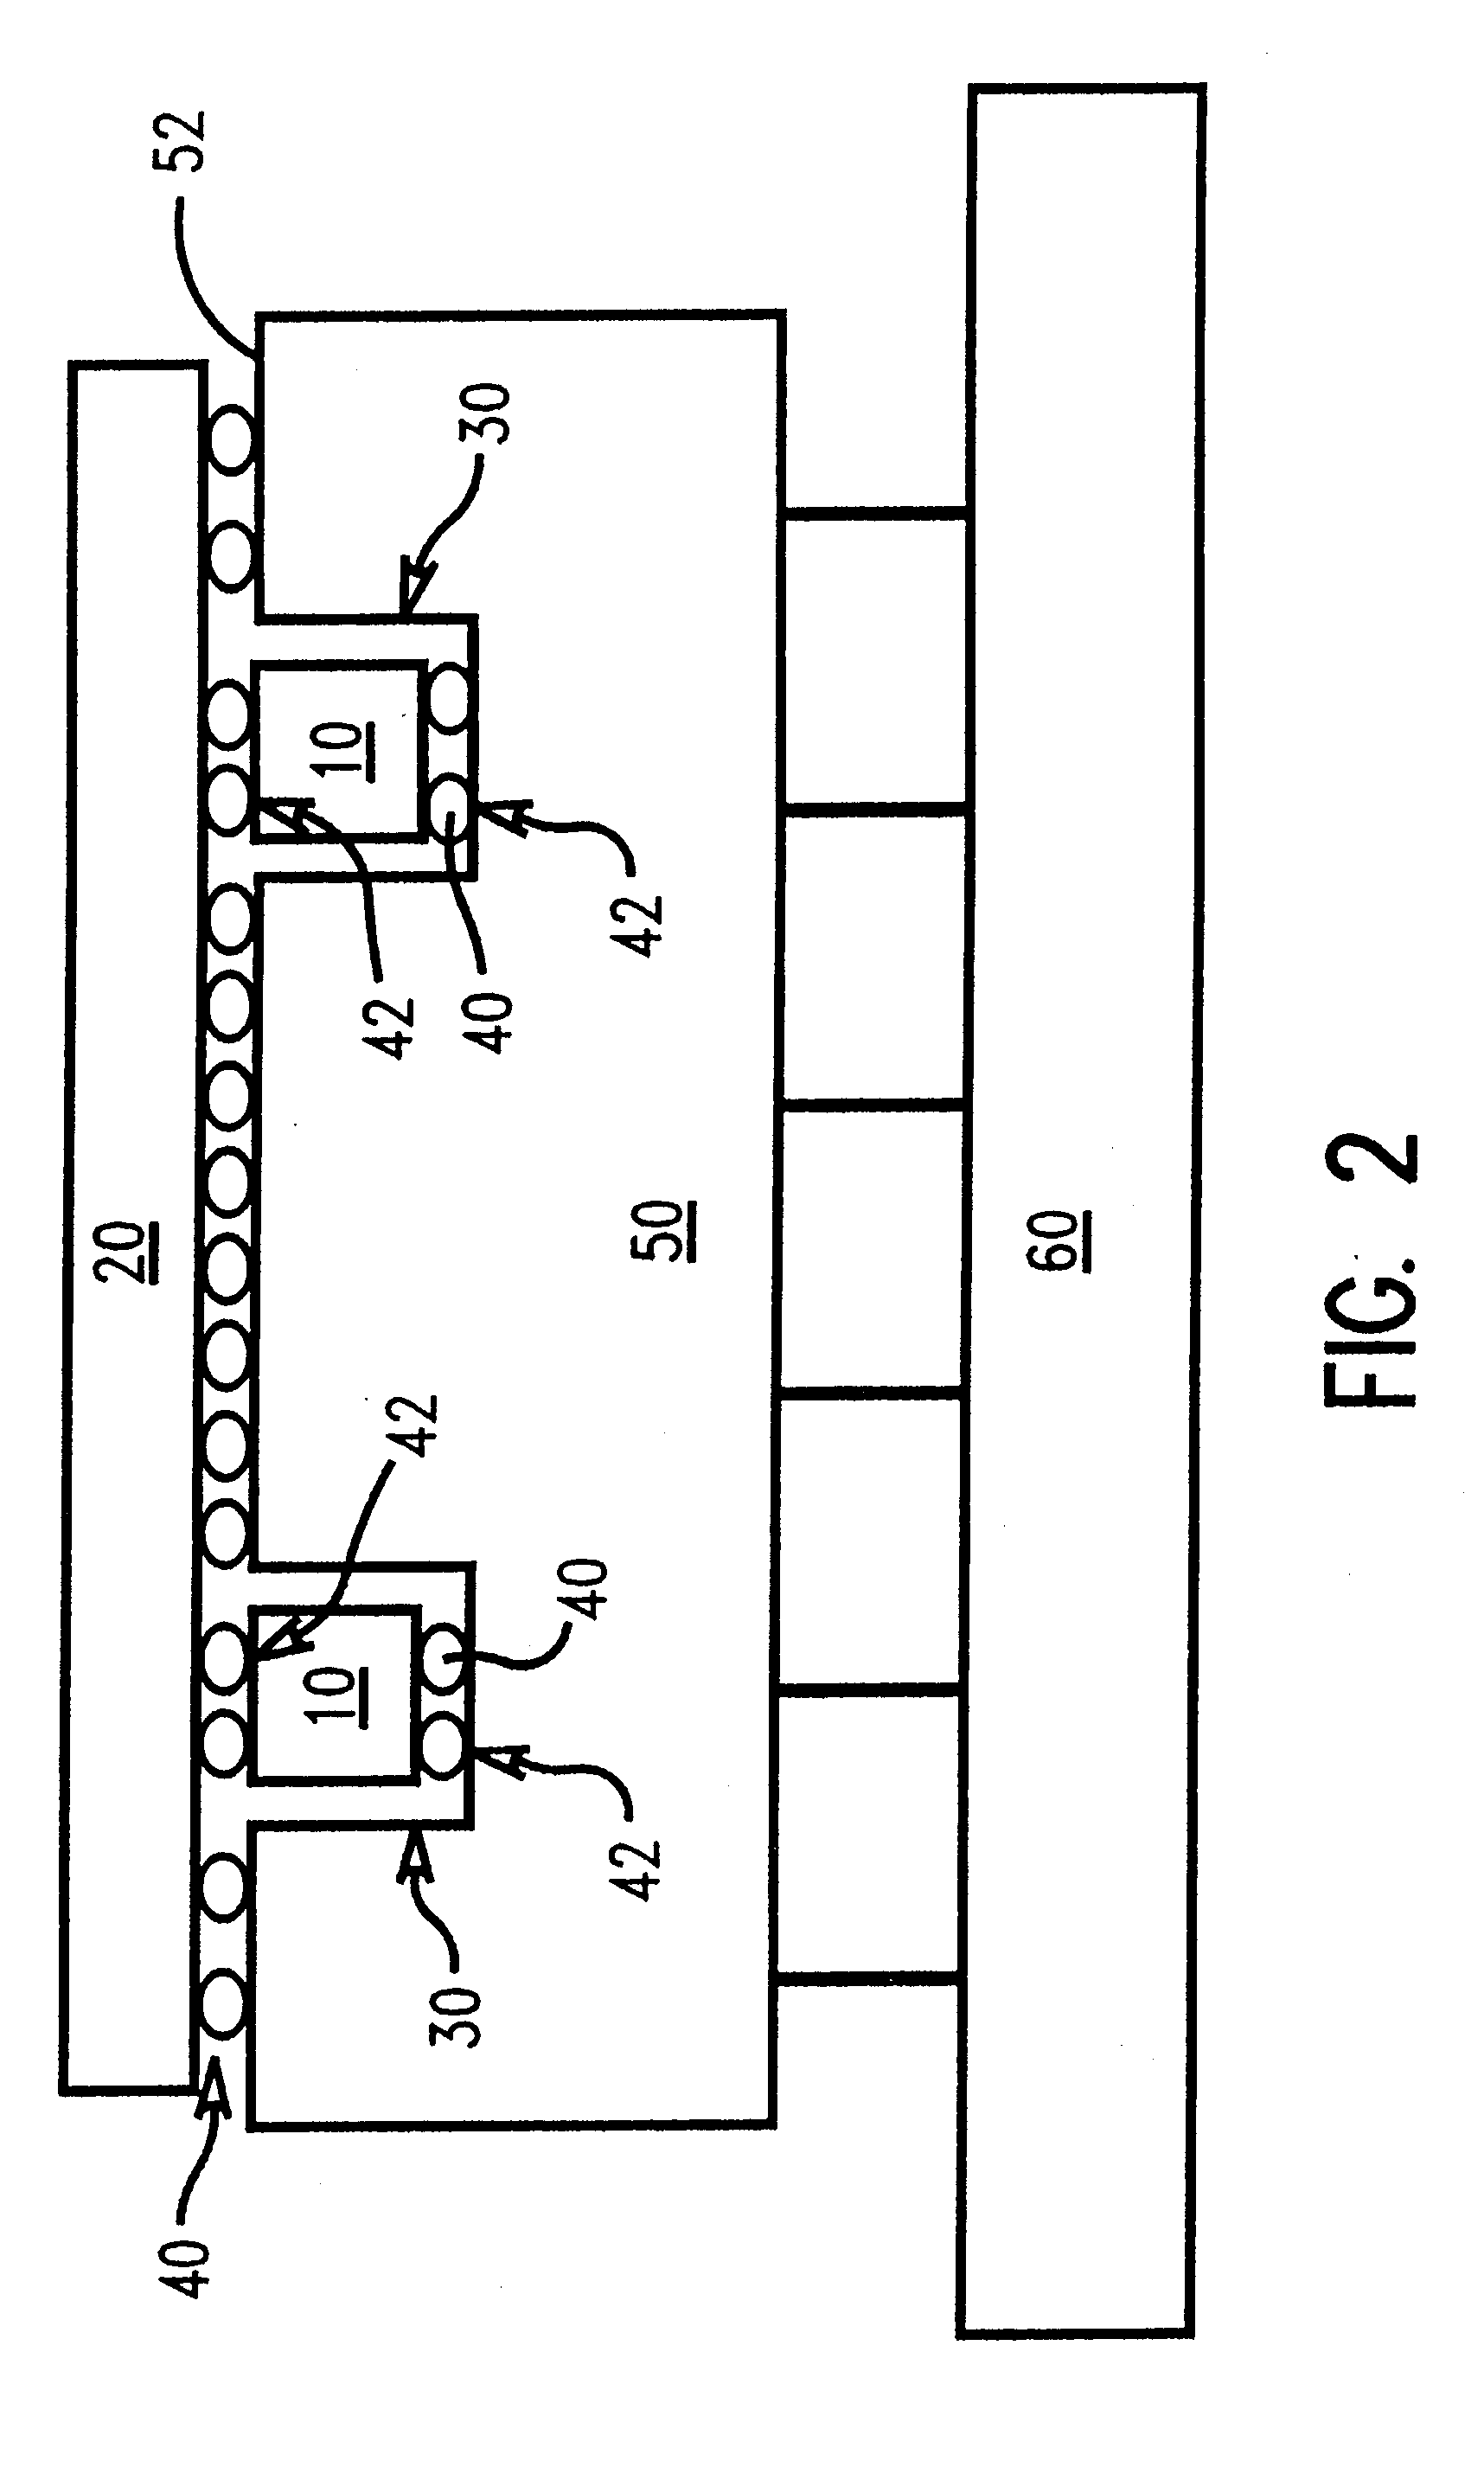 Multi-cavity substrate structure for discrete devices